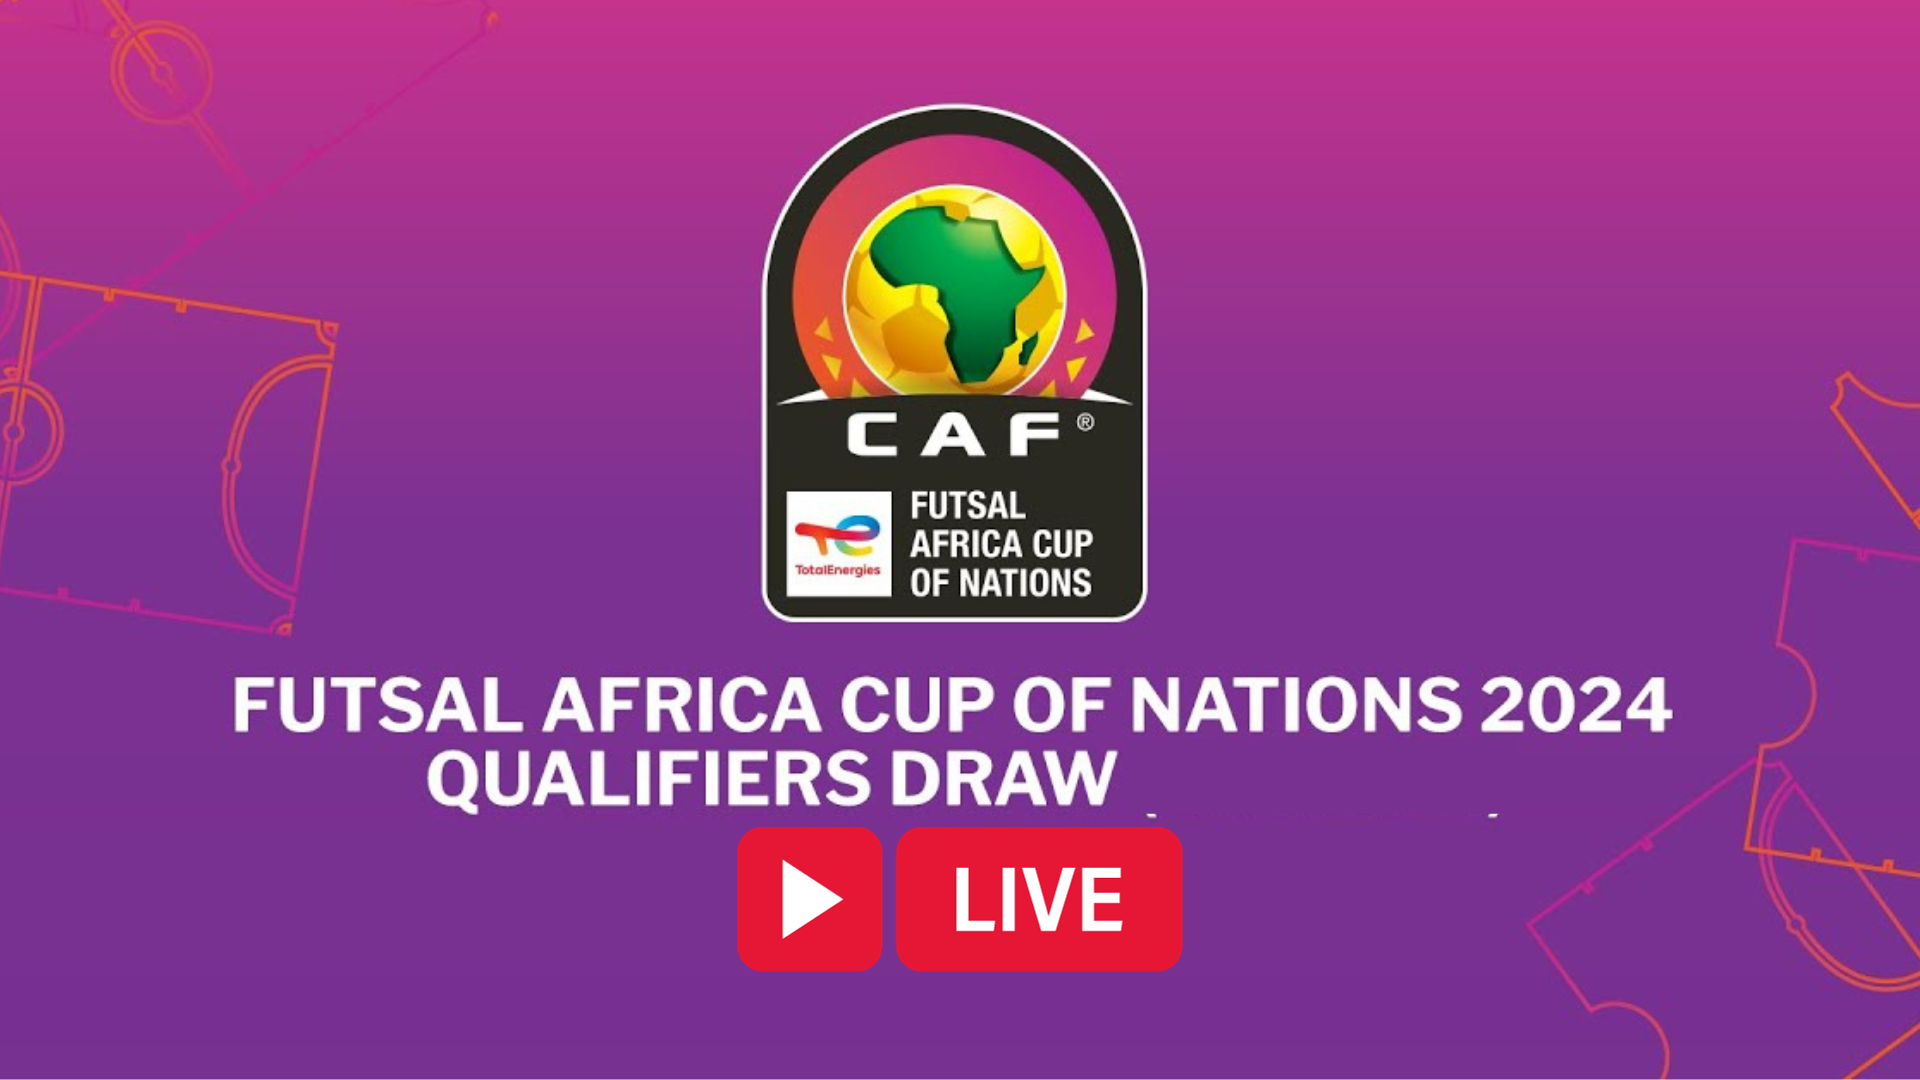 WATCH LIVE Futsal Africa Cup of Nations 2024 Qualifiers